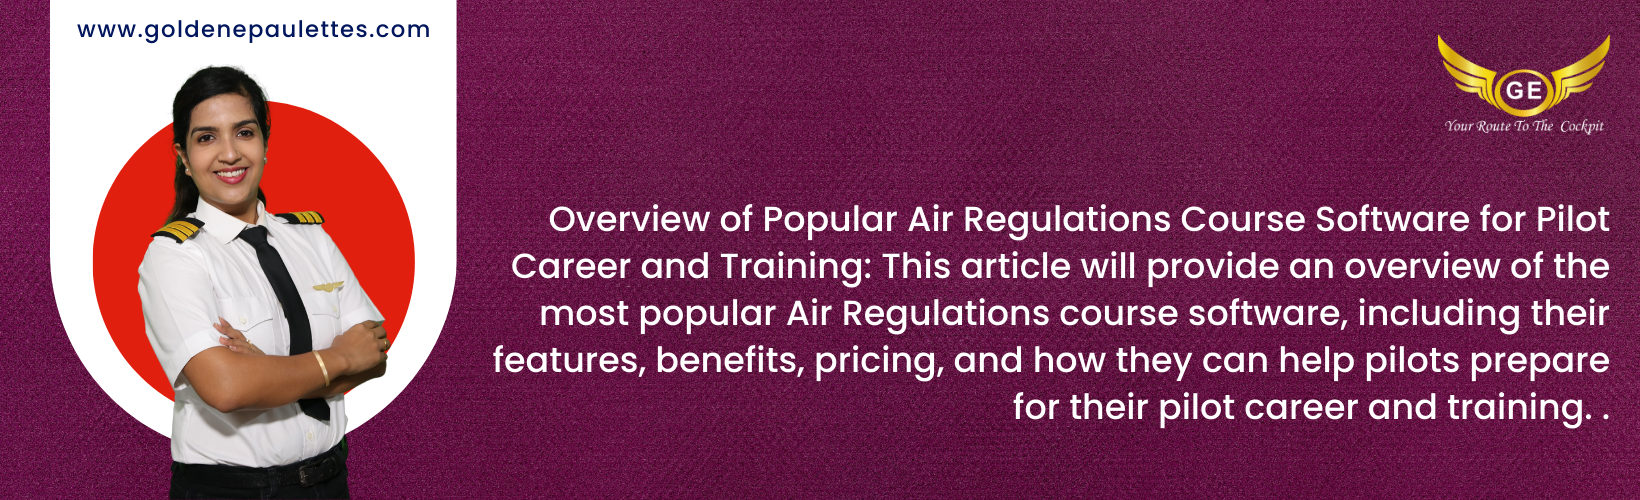 How to Make Sense of Confusing Air Regulations Course Material